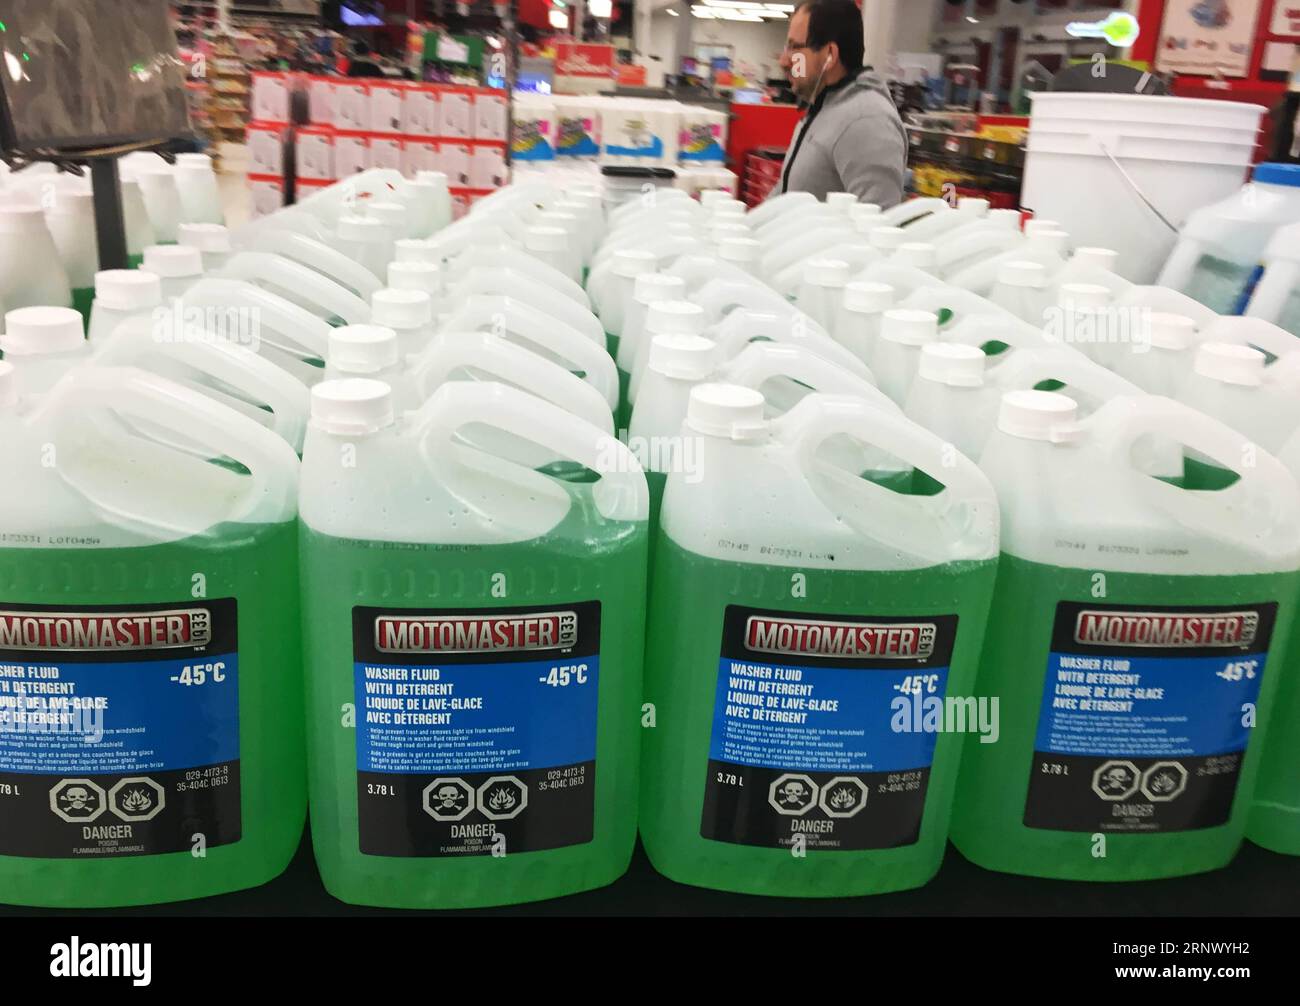 (180106) -- TORONTO, Jan. 6, 2018 -- Windshield washer fluid for temperature as low as minus 45 degrees Celsius is on sale at a store in extreme cold weather in Toronto, Canada, Jan. 5, 2018. Extreme cold temperatures as low as minus 23 degrees Celsius have covered Toronto for 12 straight days since Dec. 25, 2017. ) (gj) CANADA-TORONTO-EXTREME COLD WEATHER ZouxZheng PUBLICATIONxNOTxINxCHN Stock Photo